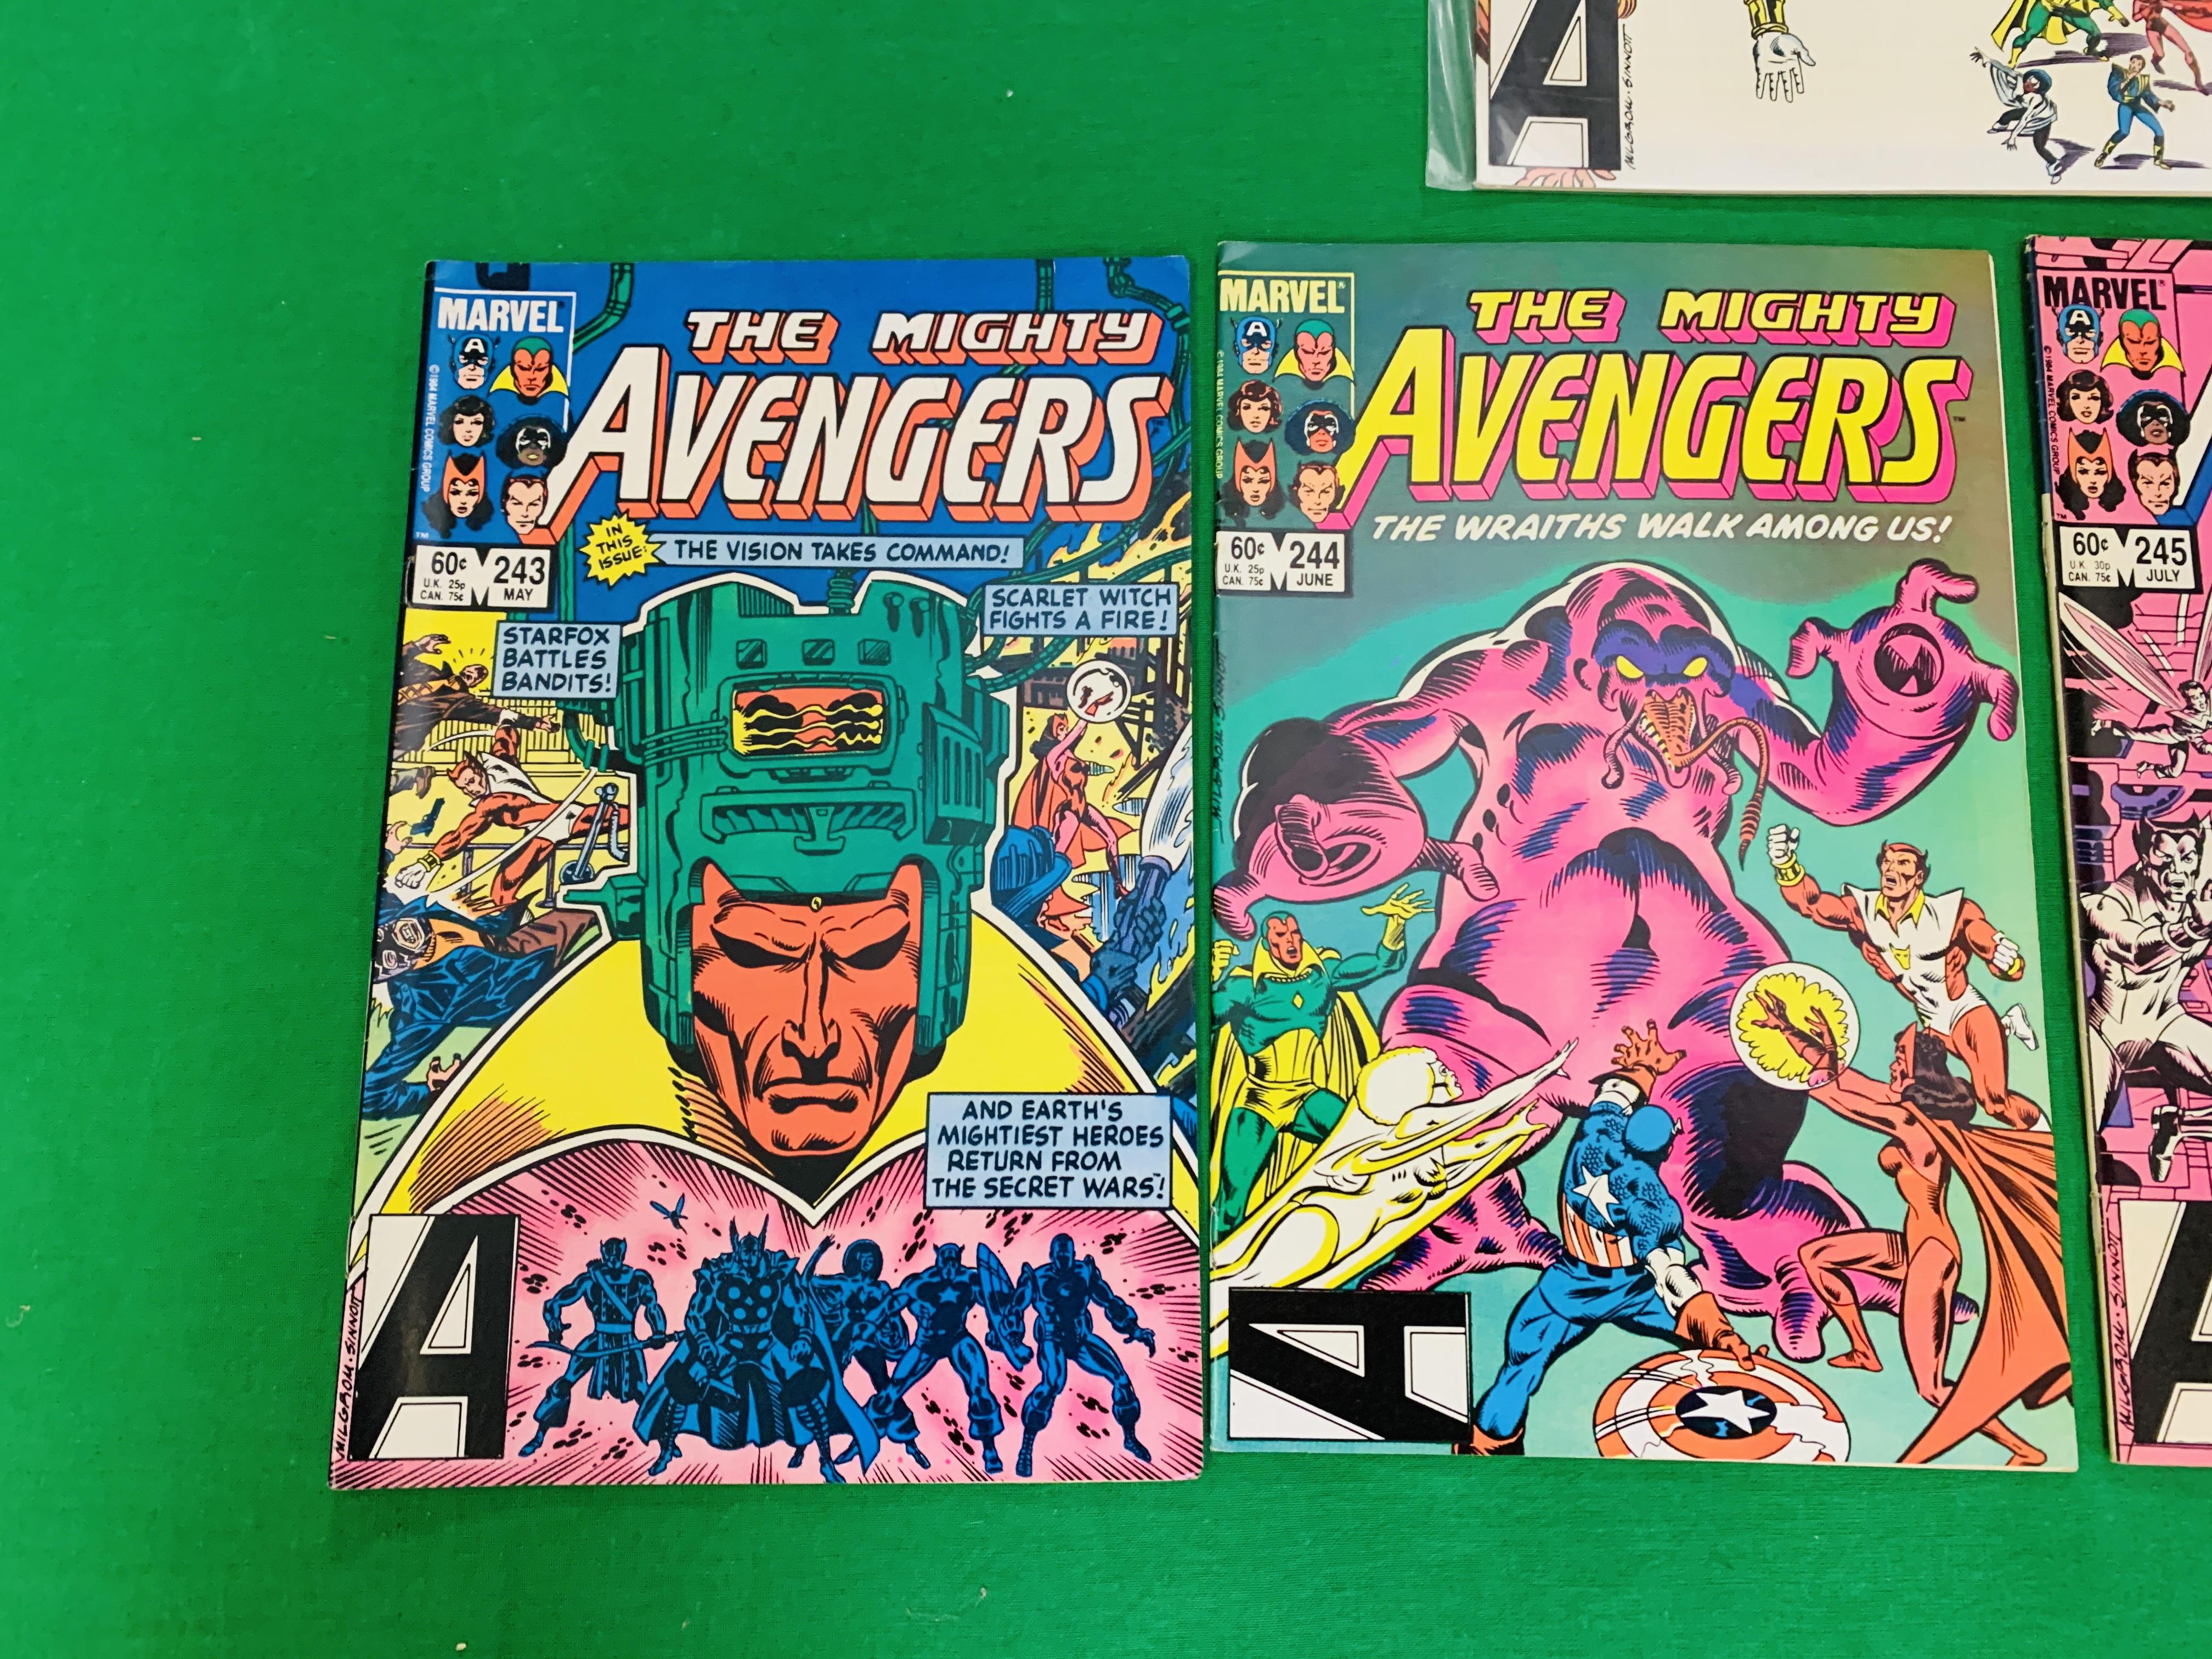 MARVEL COMICS THE AVENGERS NO. 101 - 299, MISSING ISSUES 103 AND 110. - Image 100 of 130